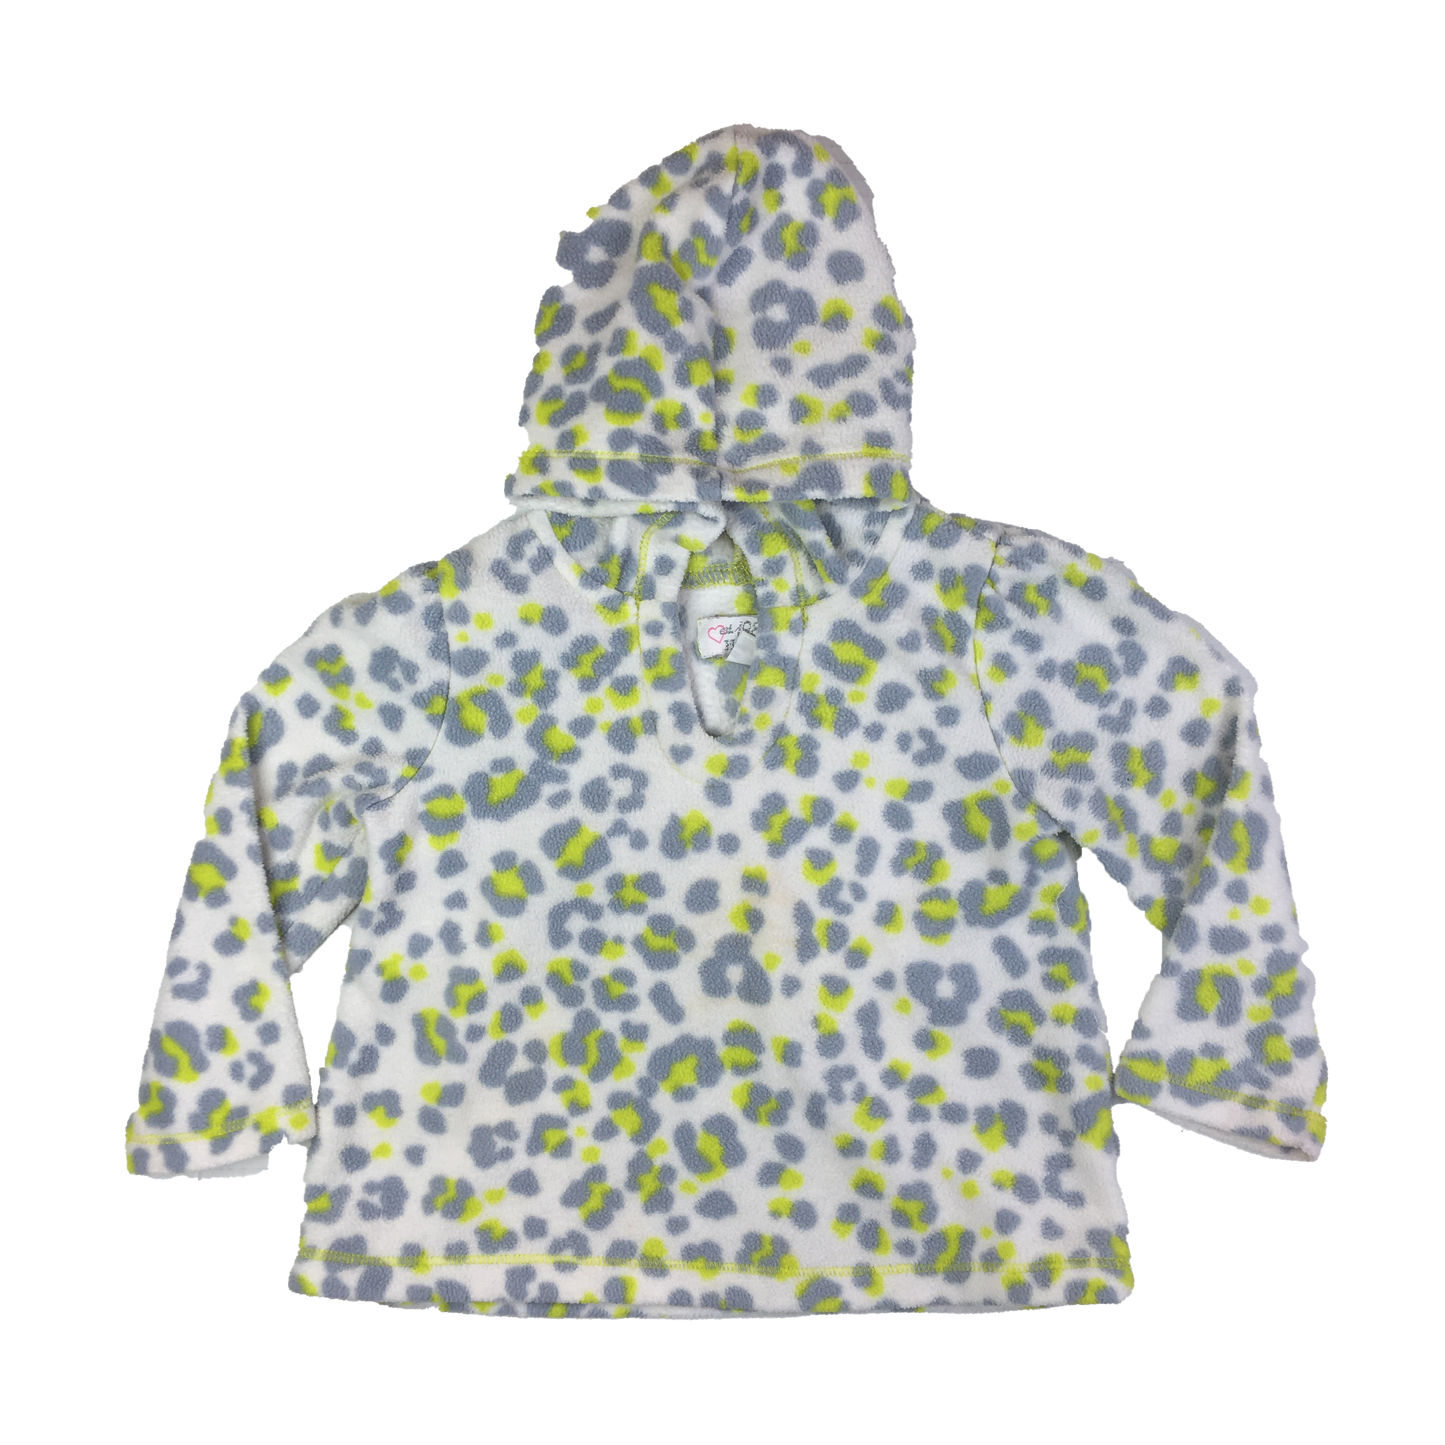 The Children's Place Fleece Hooded Pull-Over with Cheetah Print 18-24M